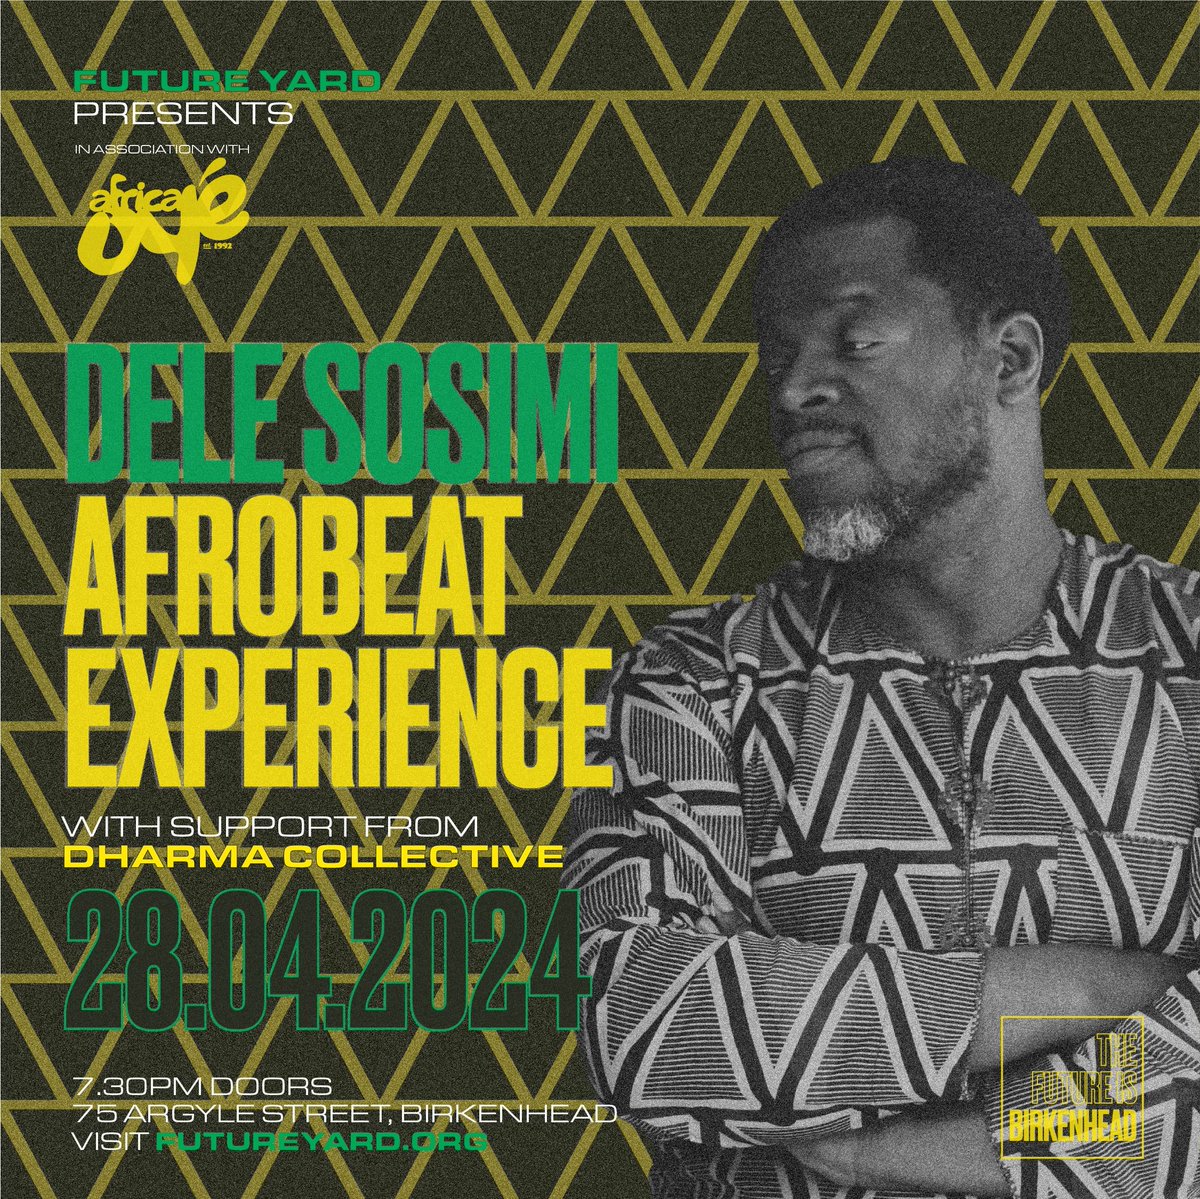 SUNDAY 🇳🇬 Having gained his formative musical education as part of Fela Kuti’s legendary Egypt 80 band. Dele Sosimi quickly gained a reputation as the premier keys player in Afrobeat... @DeleSosimi AFROBEAT EXPERIENCE @future_yard + Dharma Collective tinyurl.com/yckh9b8t